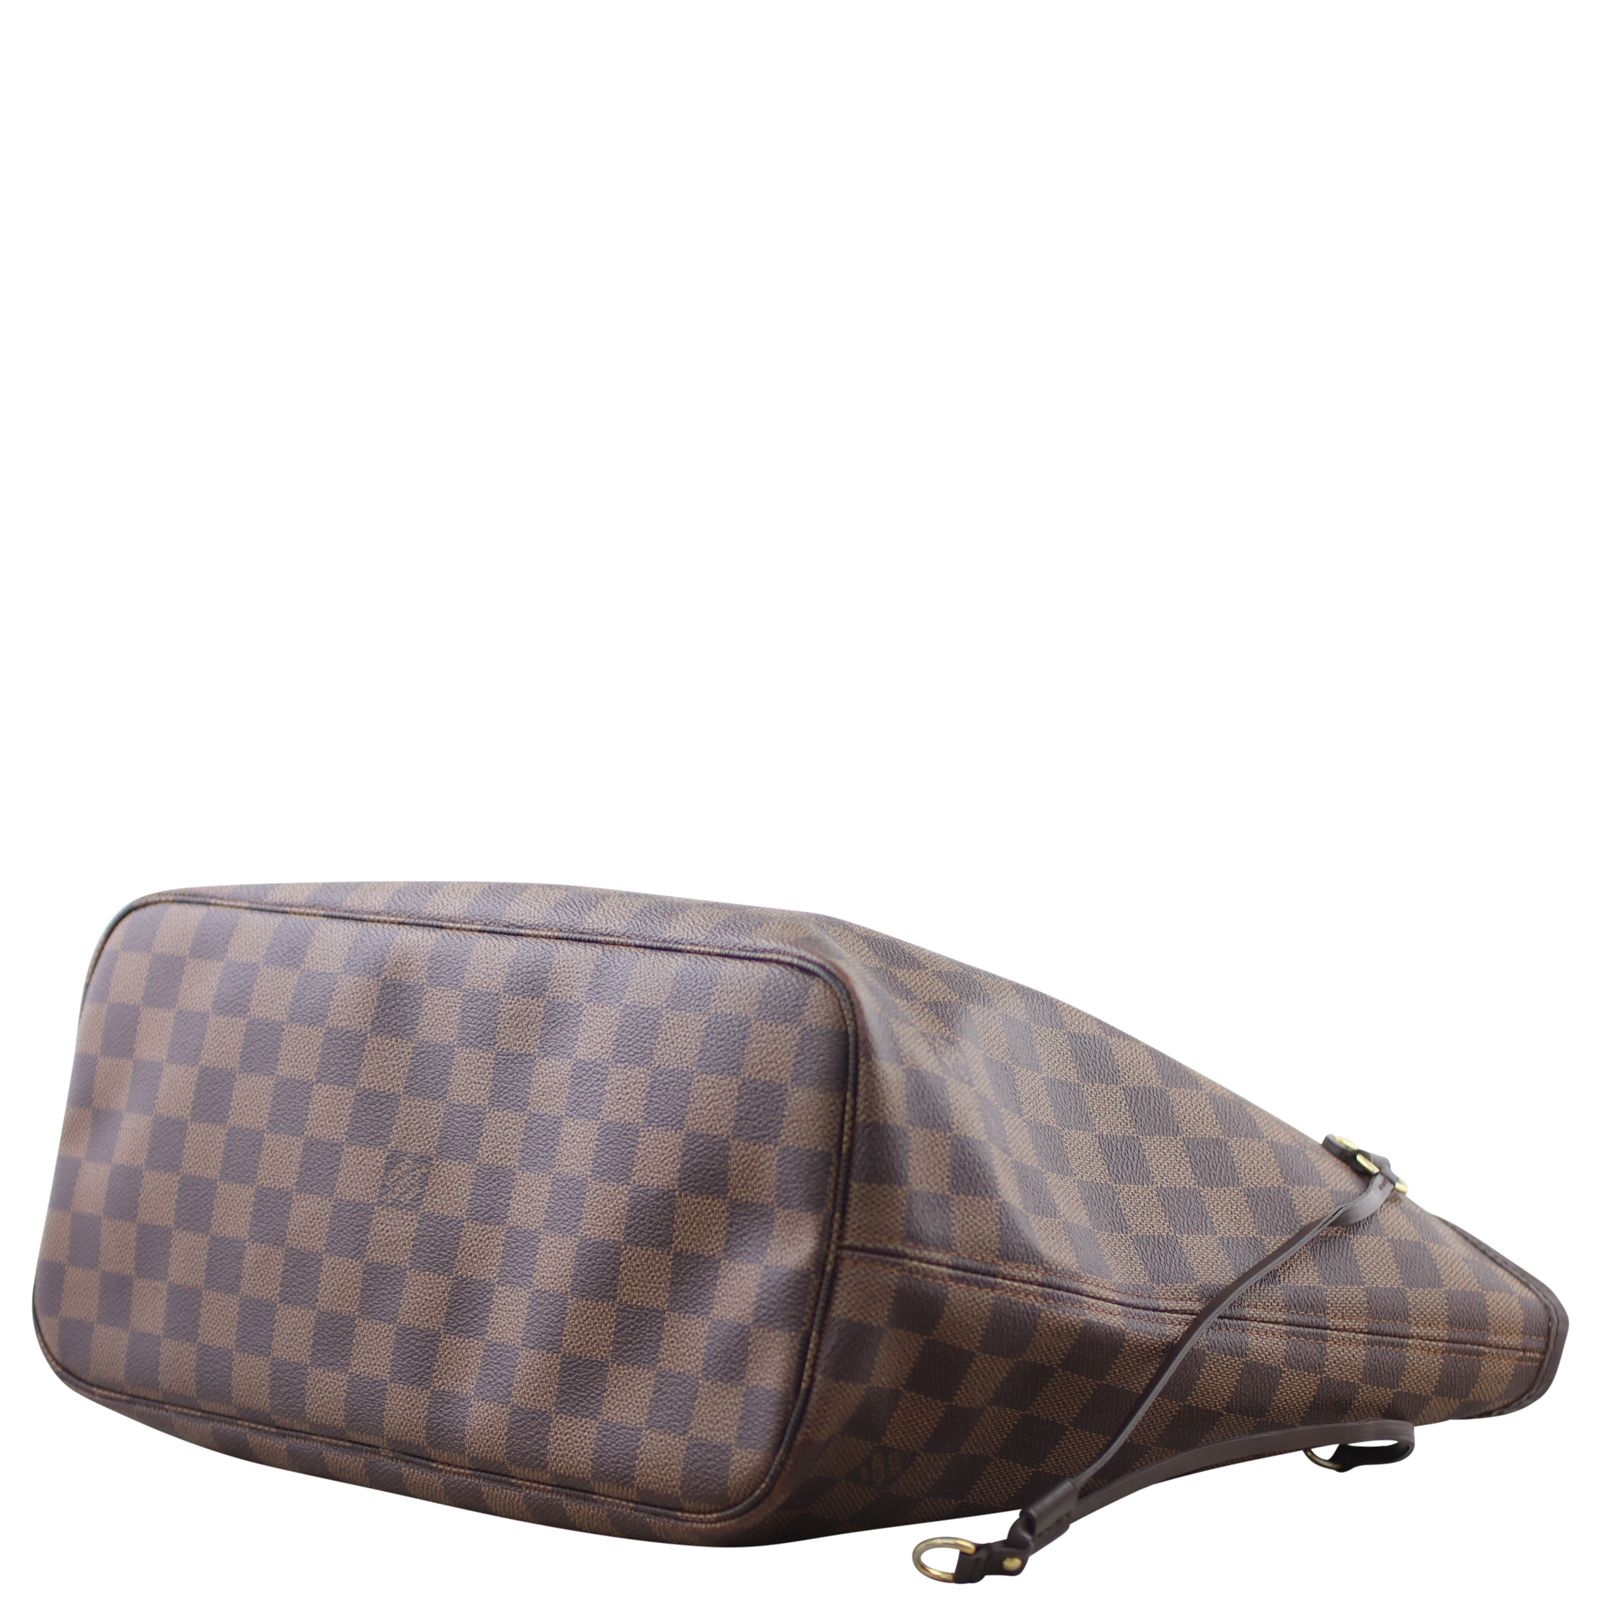 LOUIS VUITTON - NEVERFULL MM POUCH IN DAMIER EBENE – RE.LUXE AU